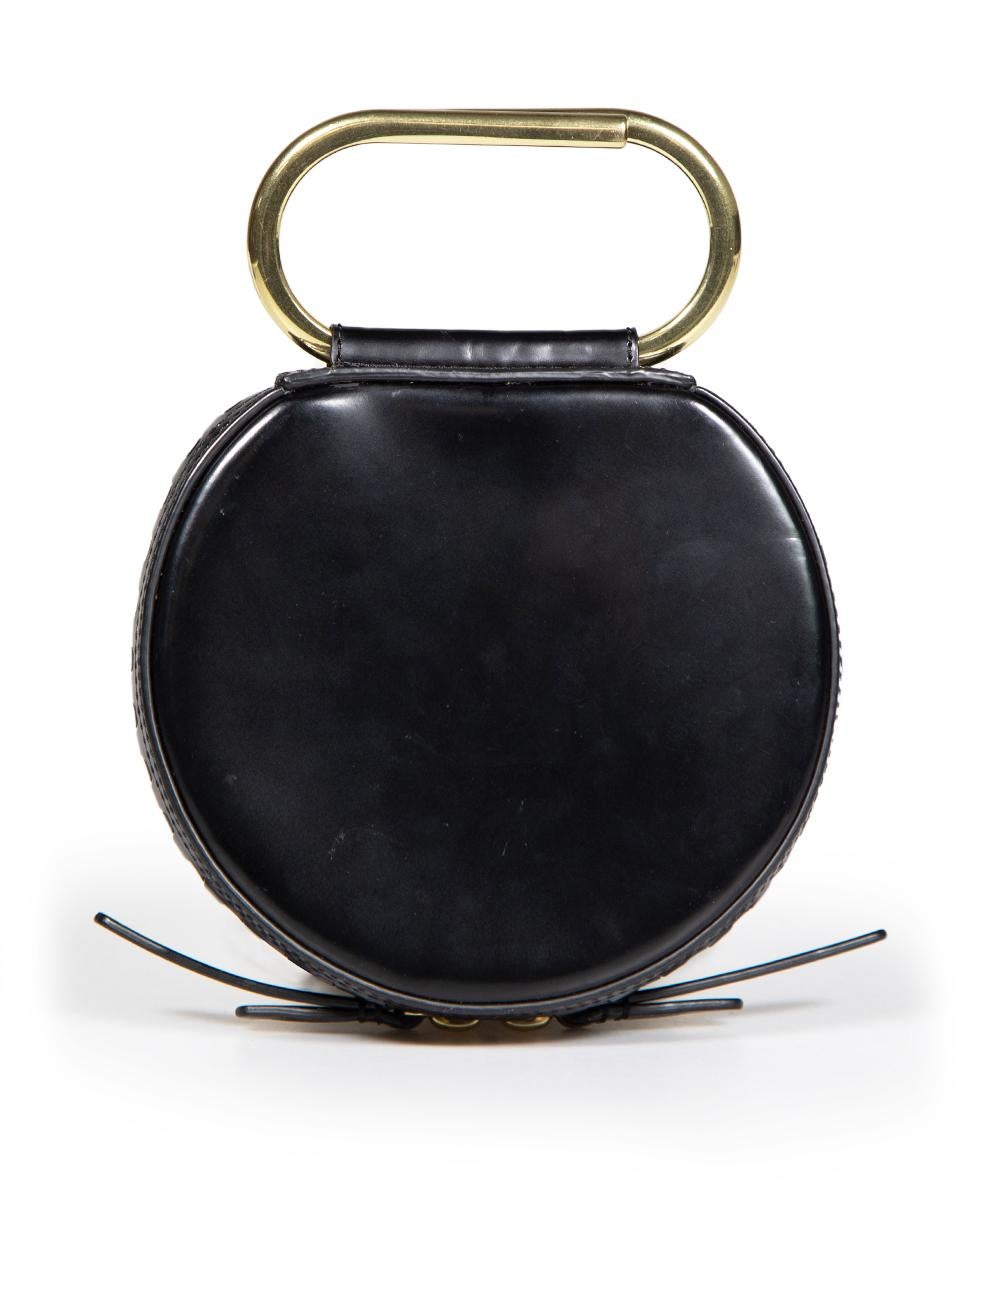 3.1 Phillip Lim Black Alix Circle Top Handle Bag In Excellent Condition For Sale In London, GB